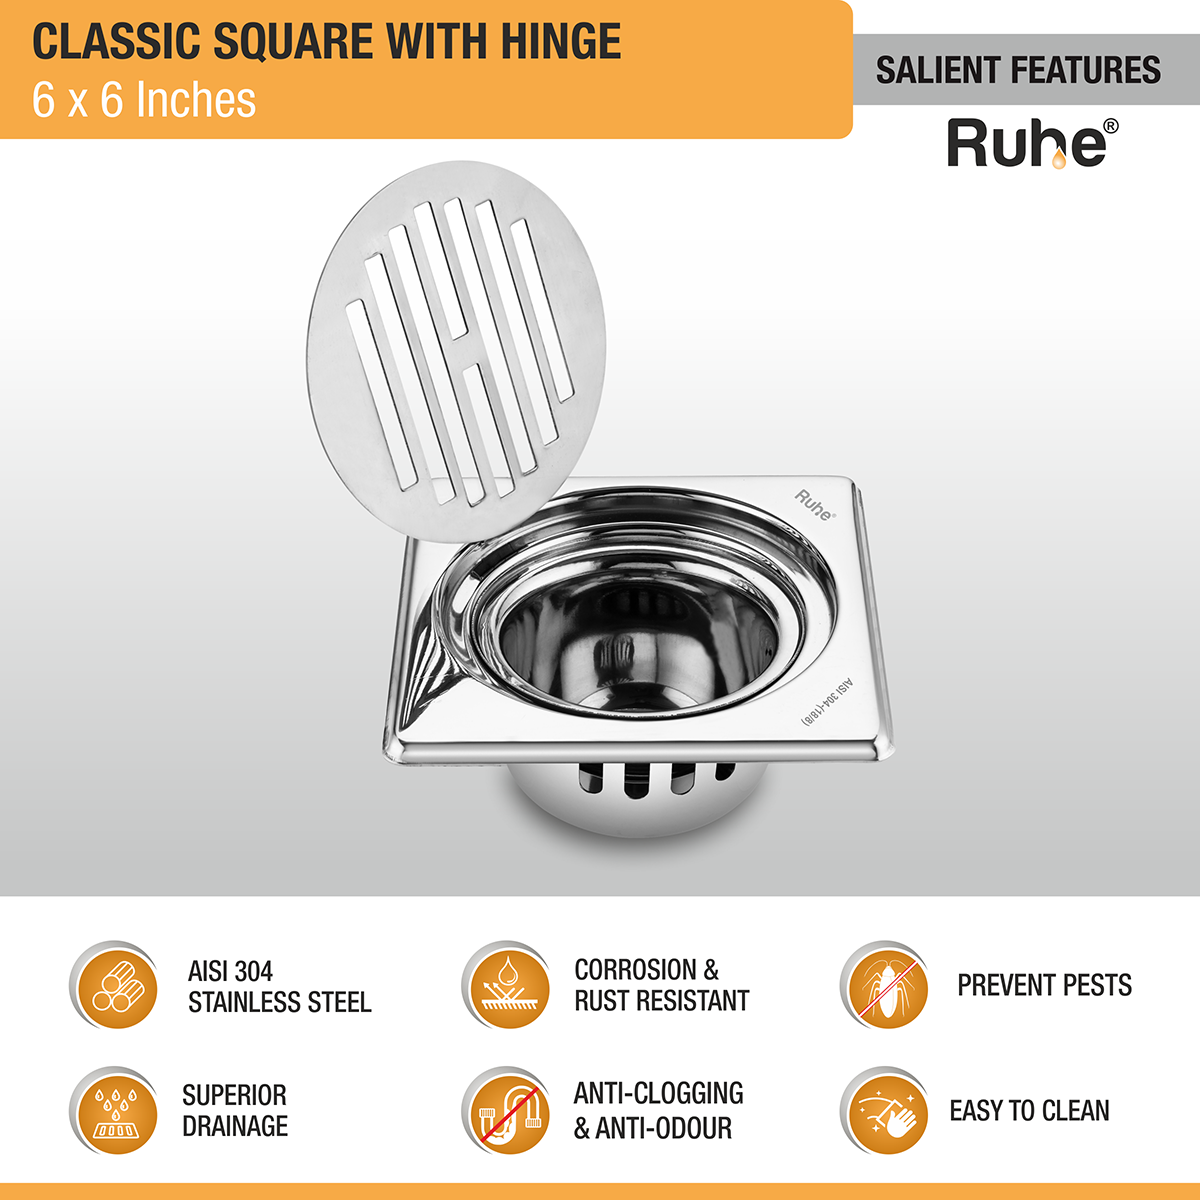 Classic Square Floor Drain (6 x 6 Inches) with Hinge & Cockroach Trap (304 Grade) features